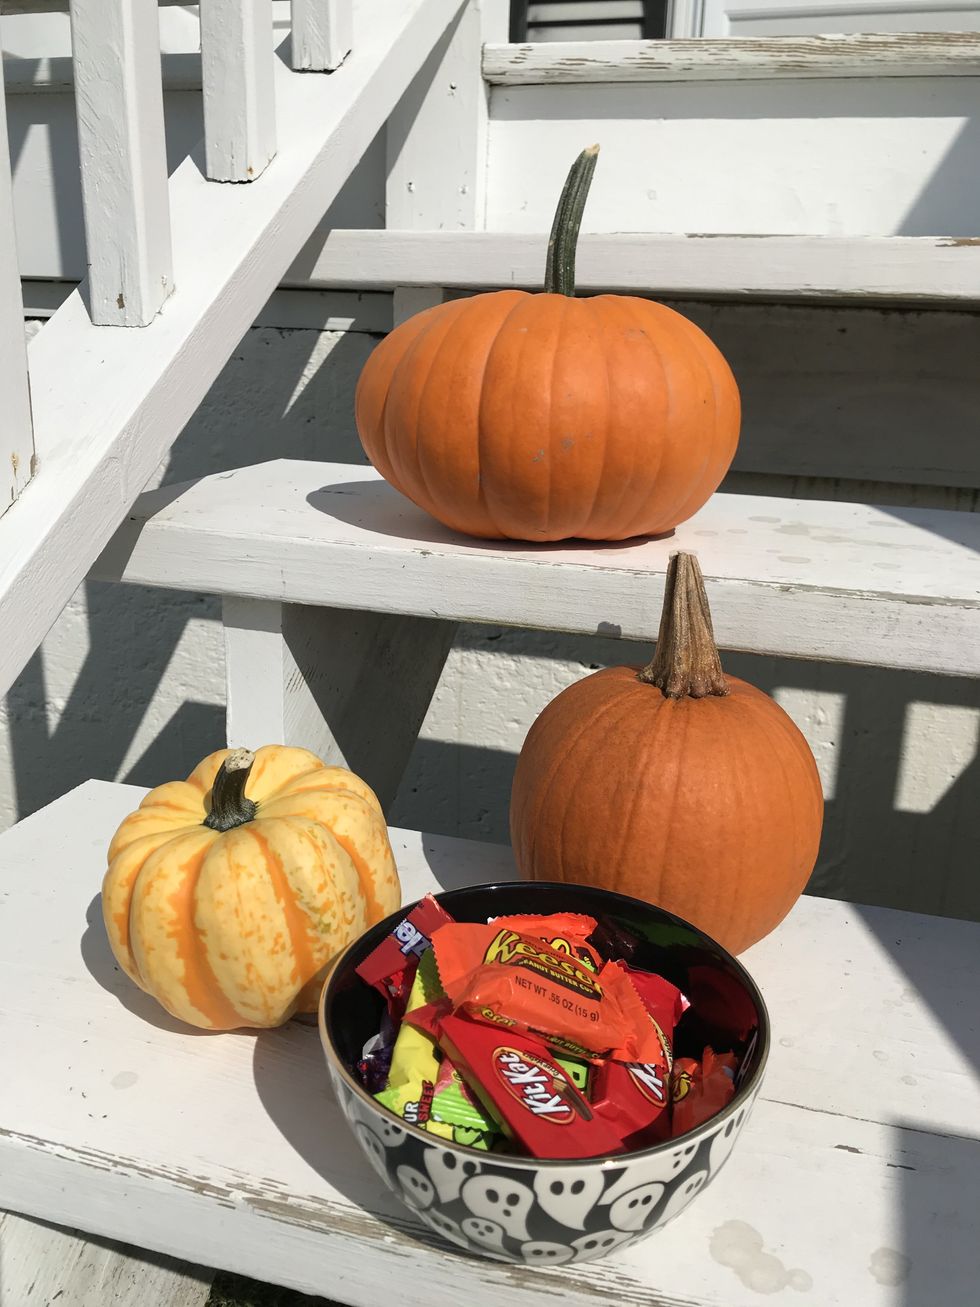 Halloween guidance: Skip trick-or-treating this year